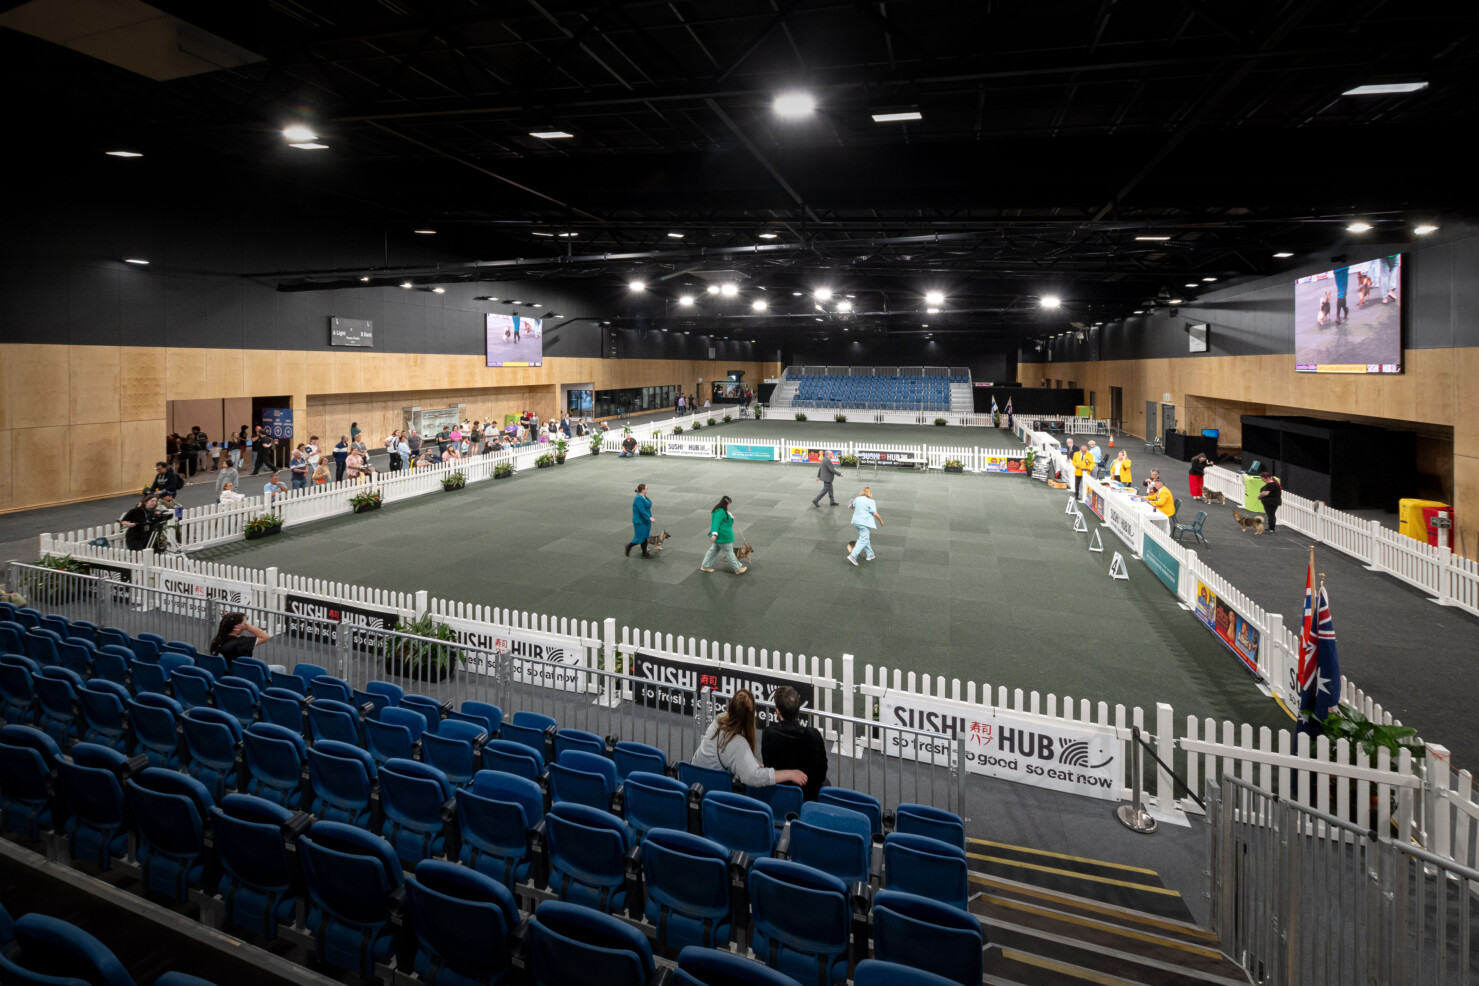 The courts are converted to host the Royal Adelaide Show Dog Competition. Spectators sit in blue tiered seating watching owners and dogs walking the arena. The maple flooring is covered with green synthetic turf and the arena is fenced in white pickets.